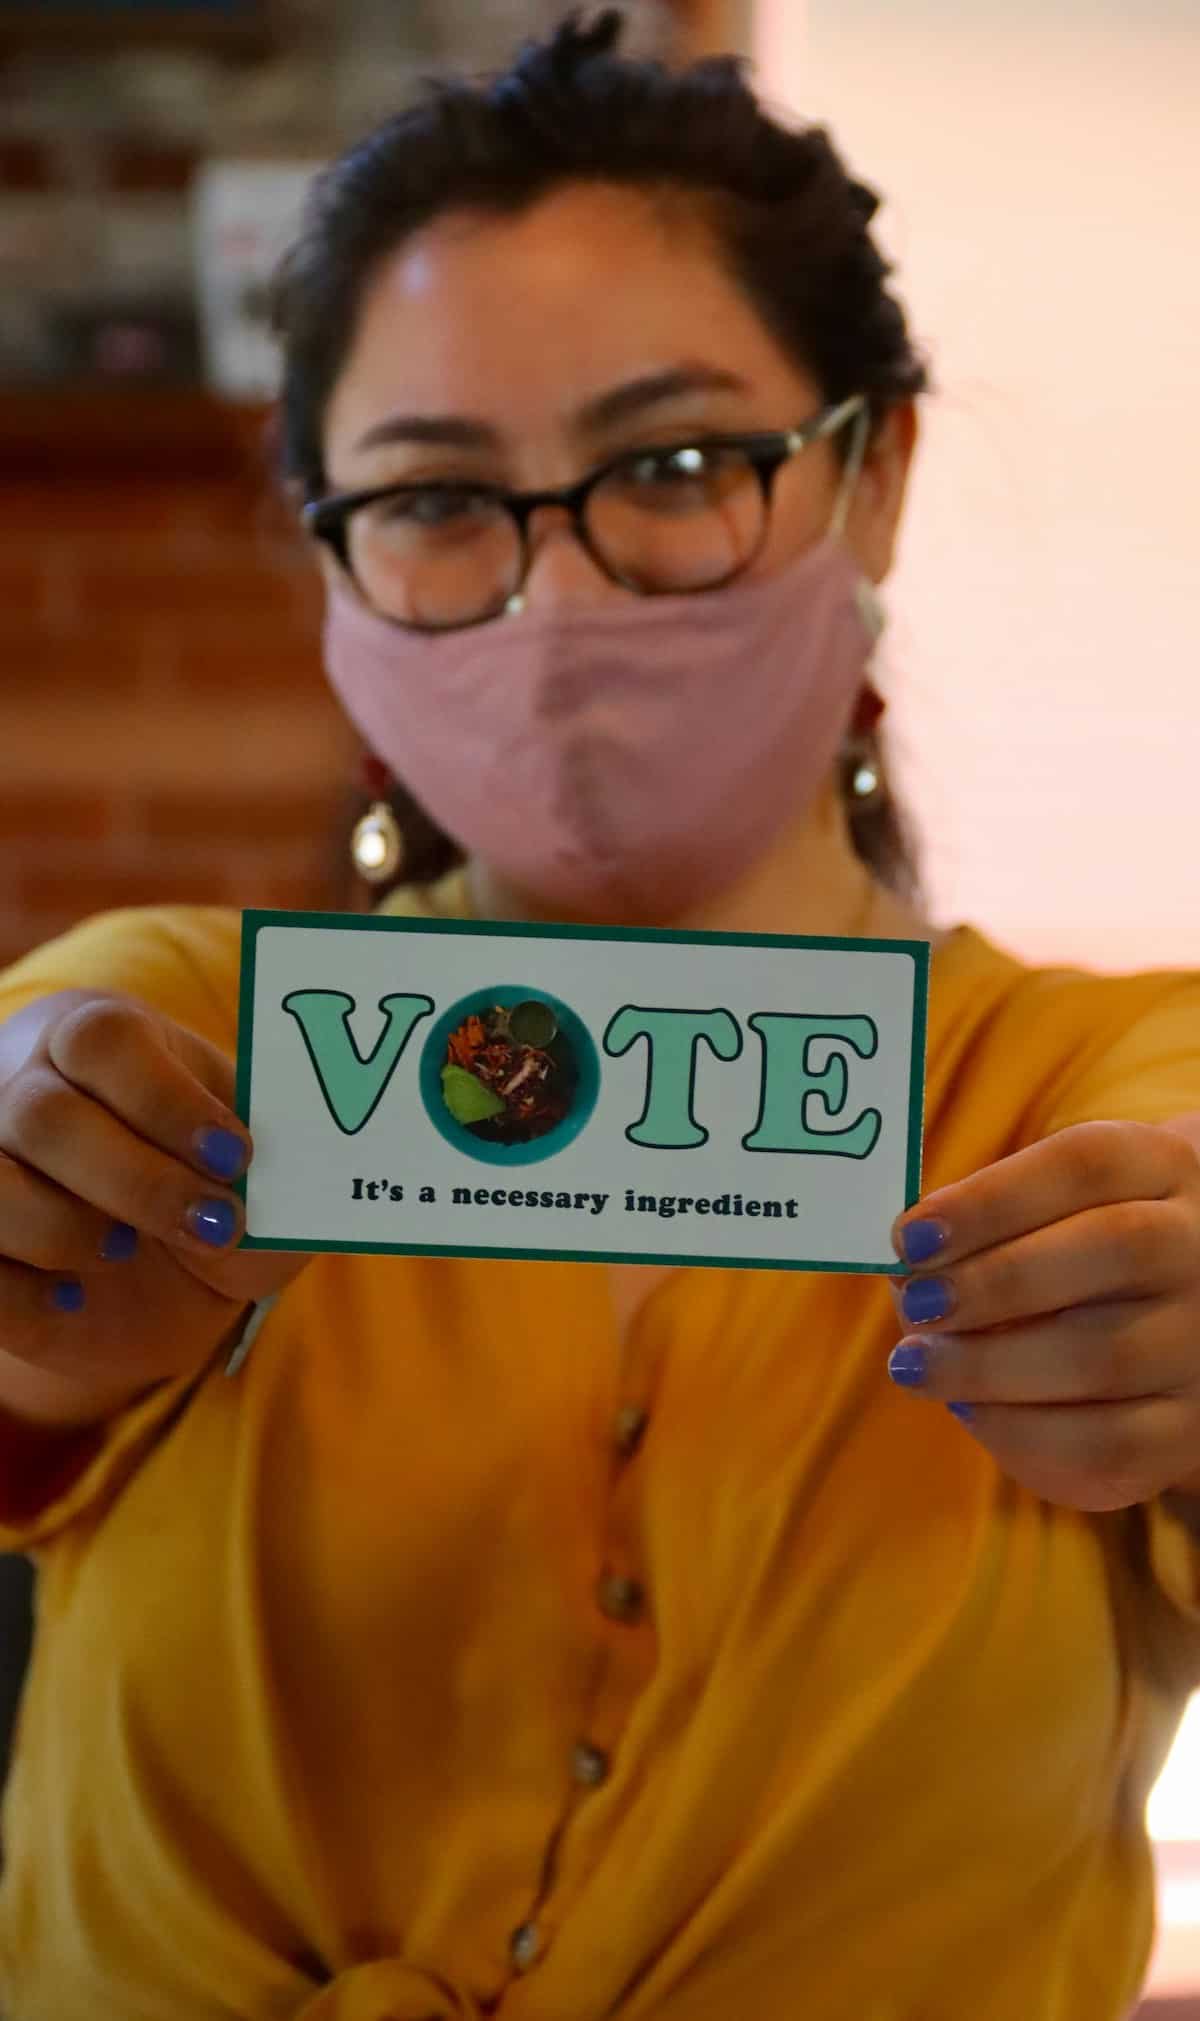 Woman holding a card that says "Vote: It's a necessary ingredient".